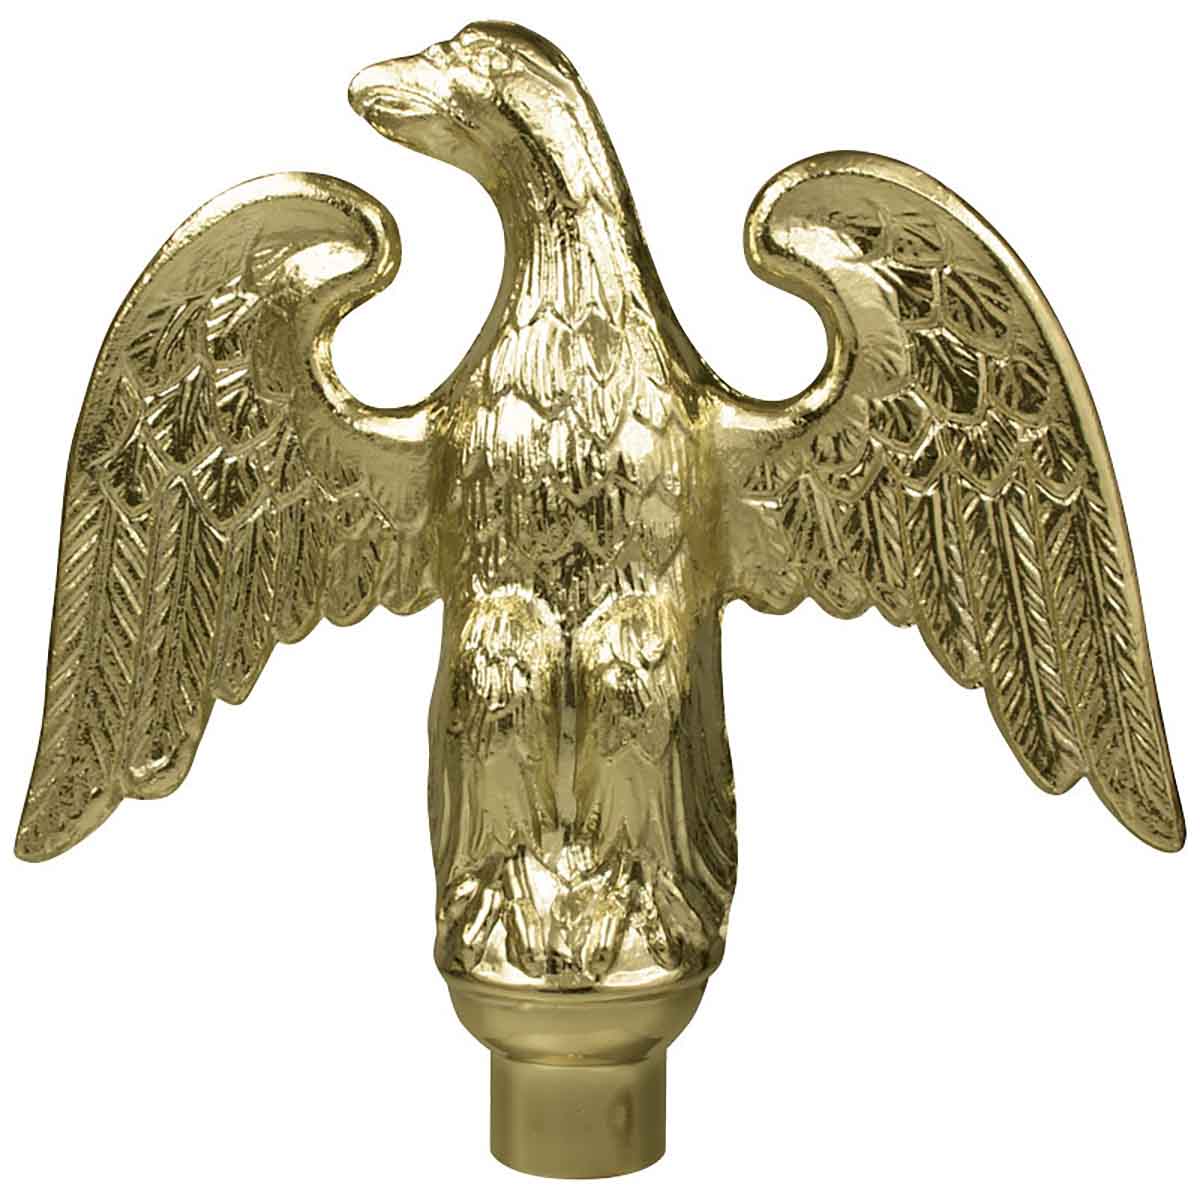 Hi-Impact ABS Styrene Perched Eagle Ornament